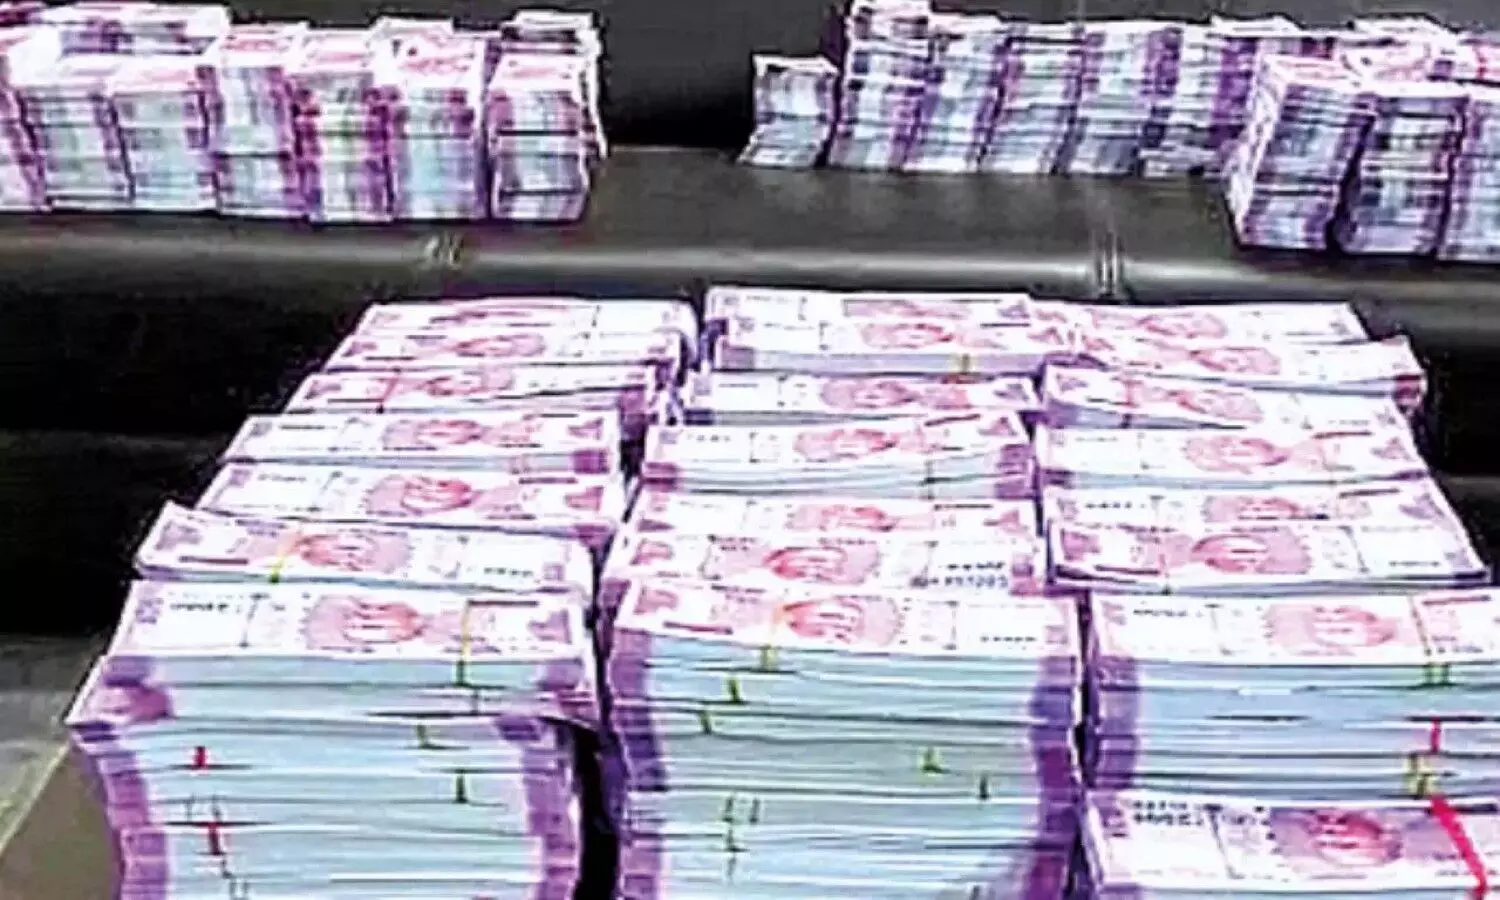 fake currency worth Rs 317 crore seized in Gujarat